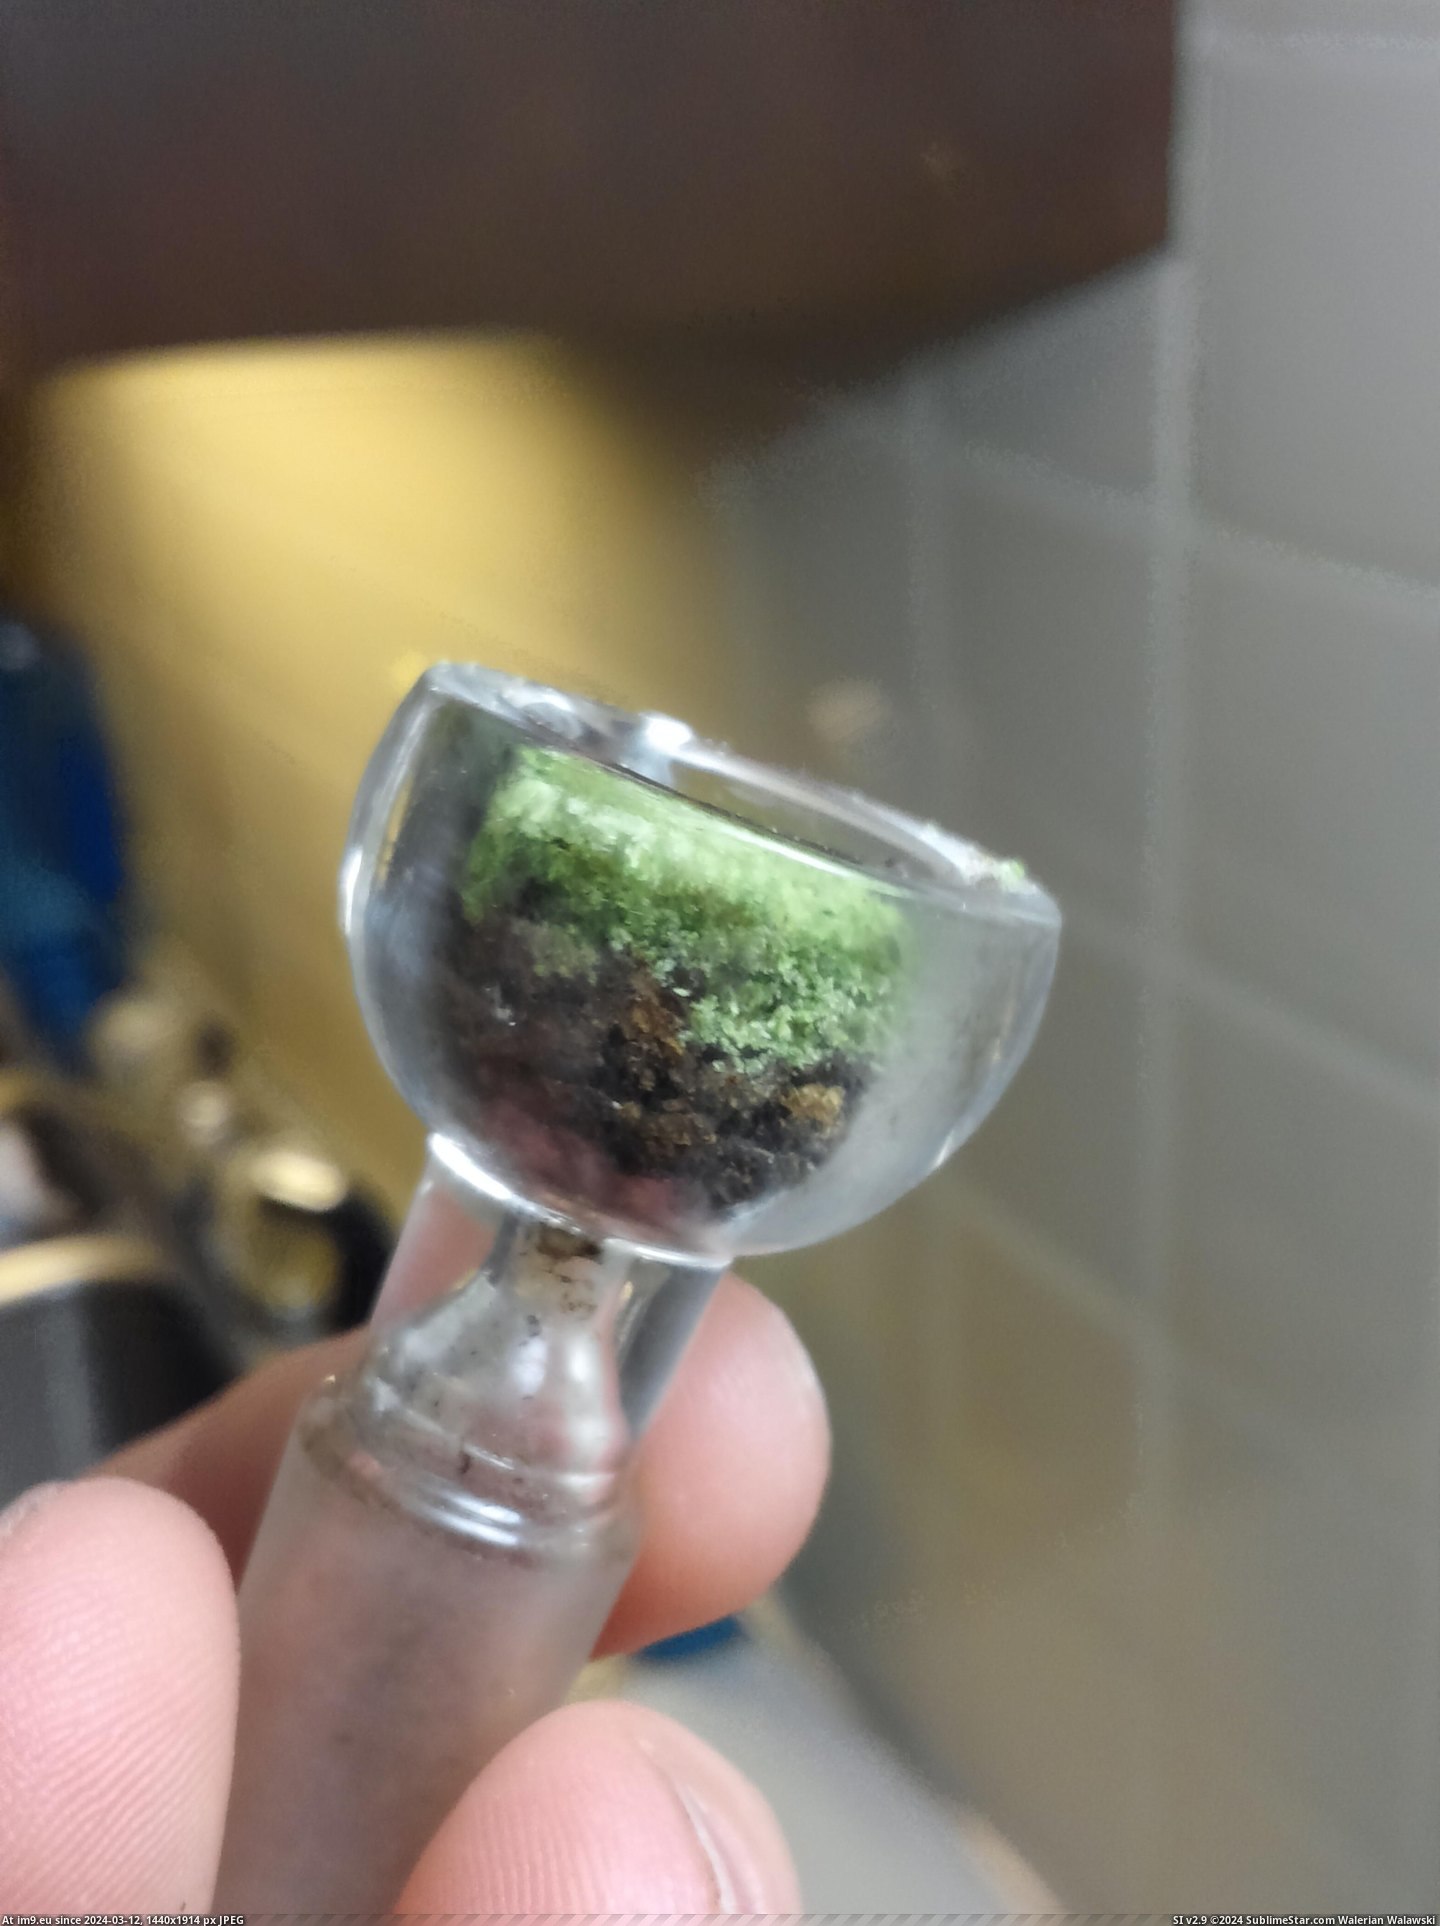 #Trees #Minecraft #Weed #Bowl [Mildlyinteresting] This bowl of weed looks like a Minecraft block [Trees] Pic. (Image of album My r/MILDLYINTERESTING favs))